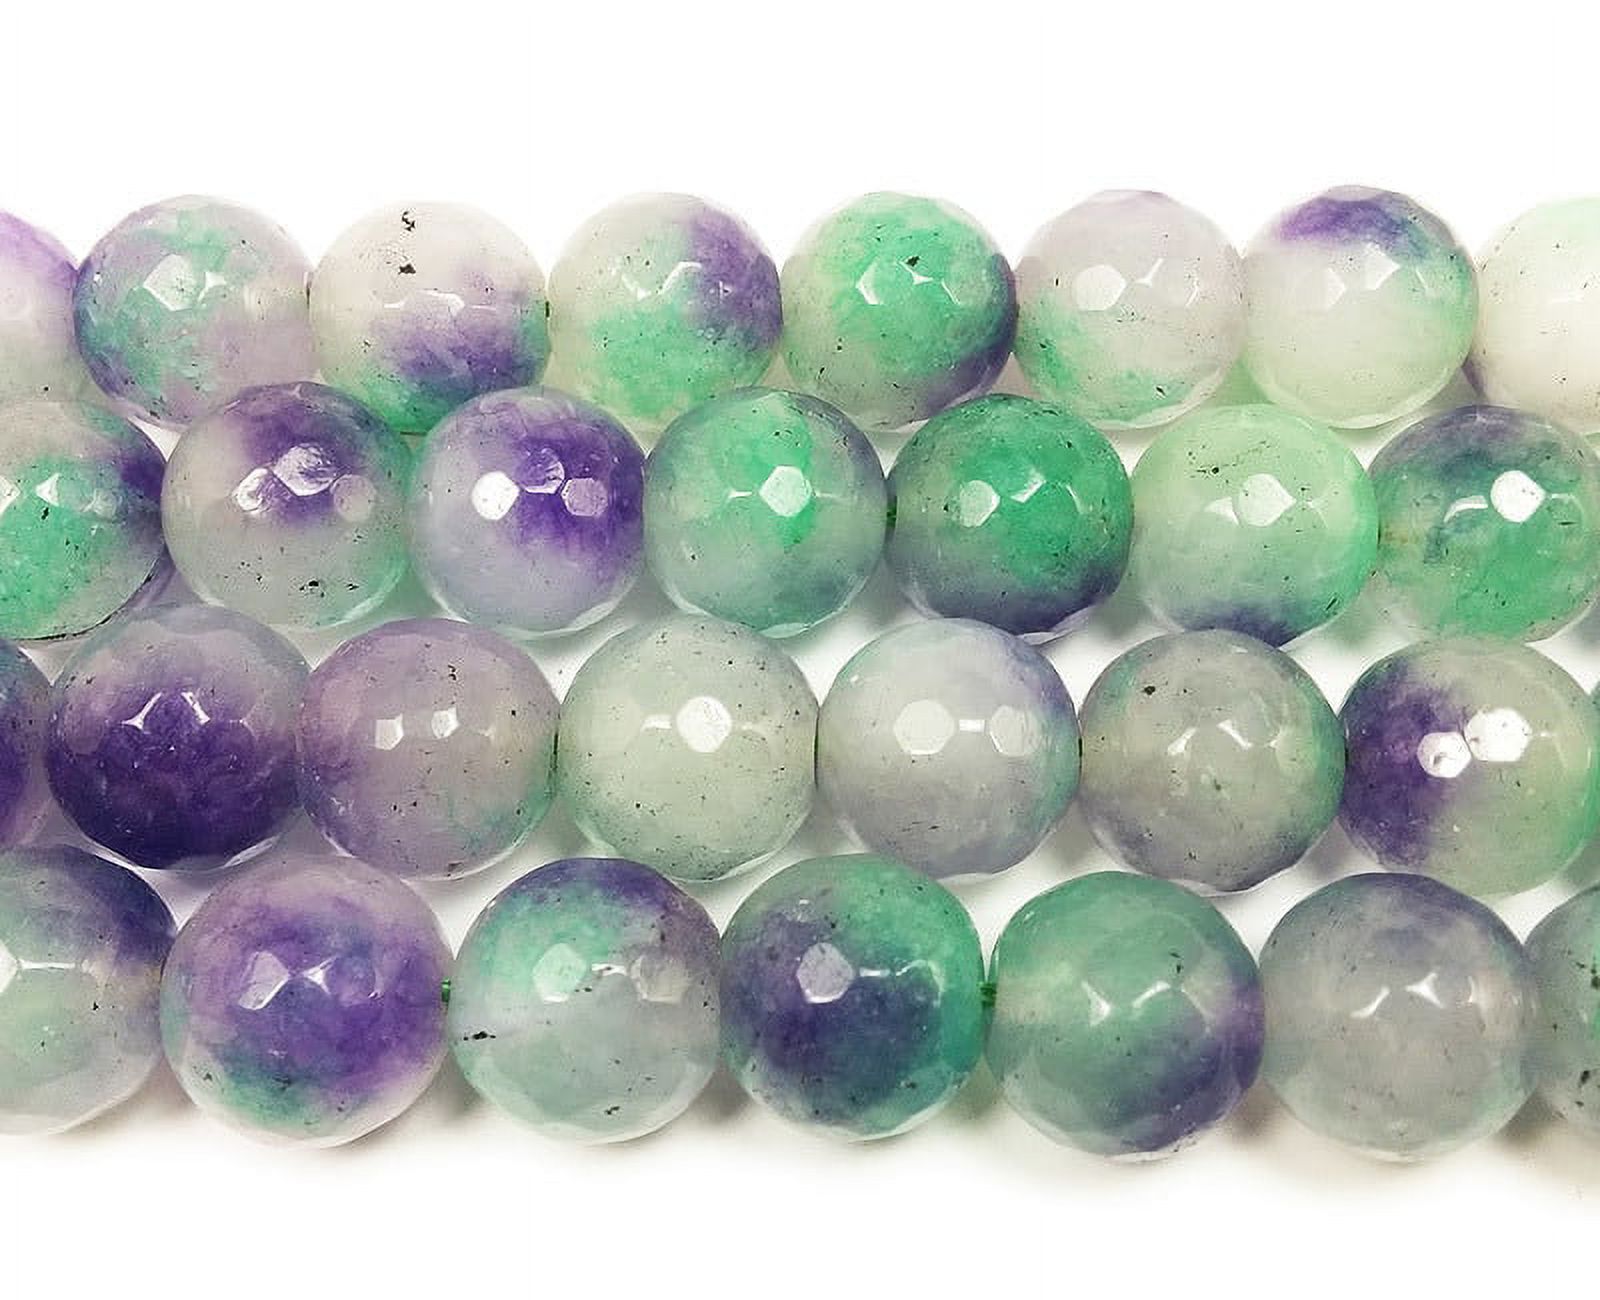 13-14mm Multicolor Purple Green And White Jade Faceted Round Beads Genuine Gemstone Natural Jewelry Making - image 1 of 1